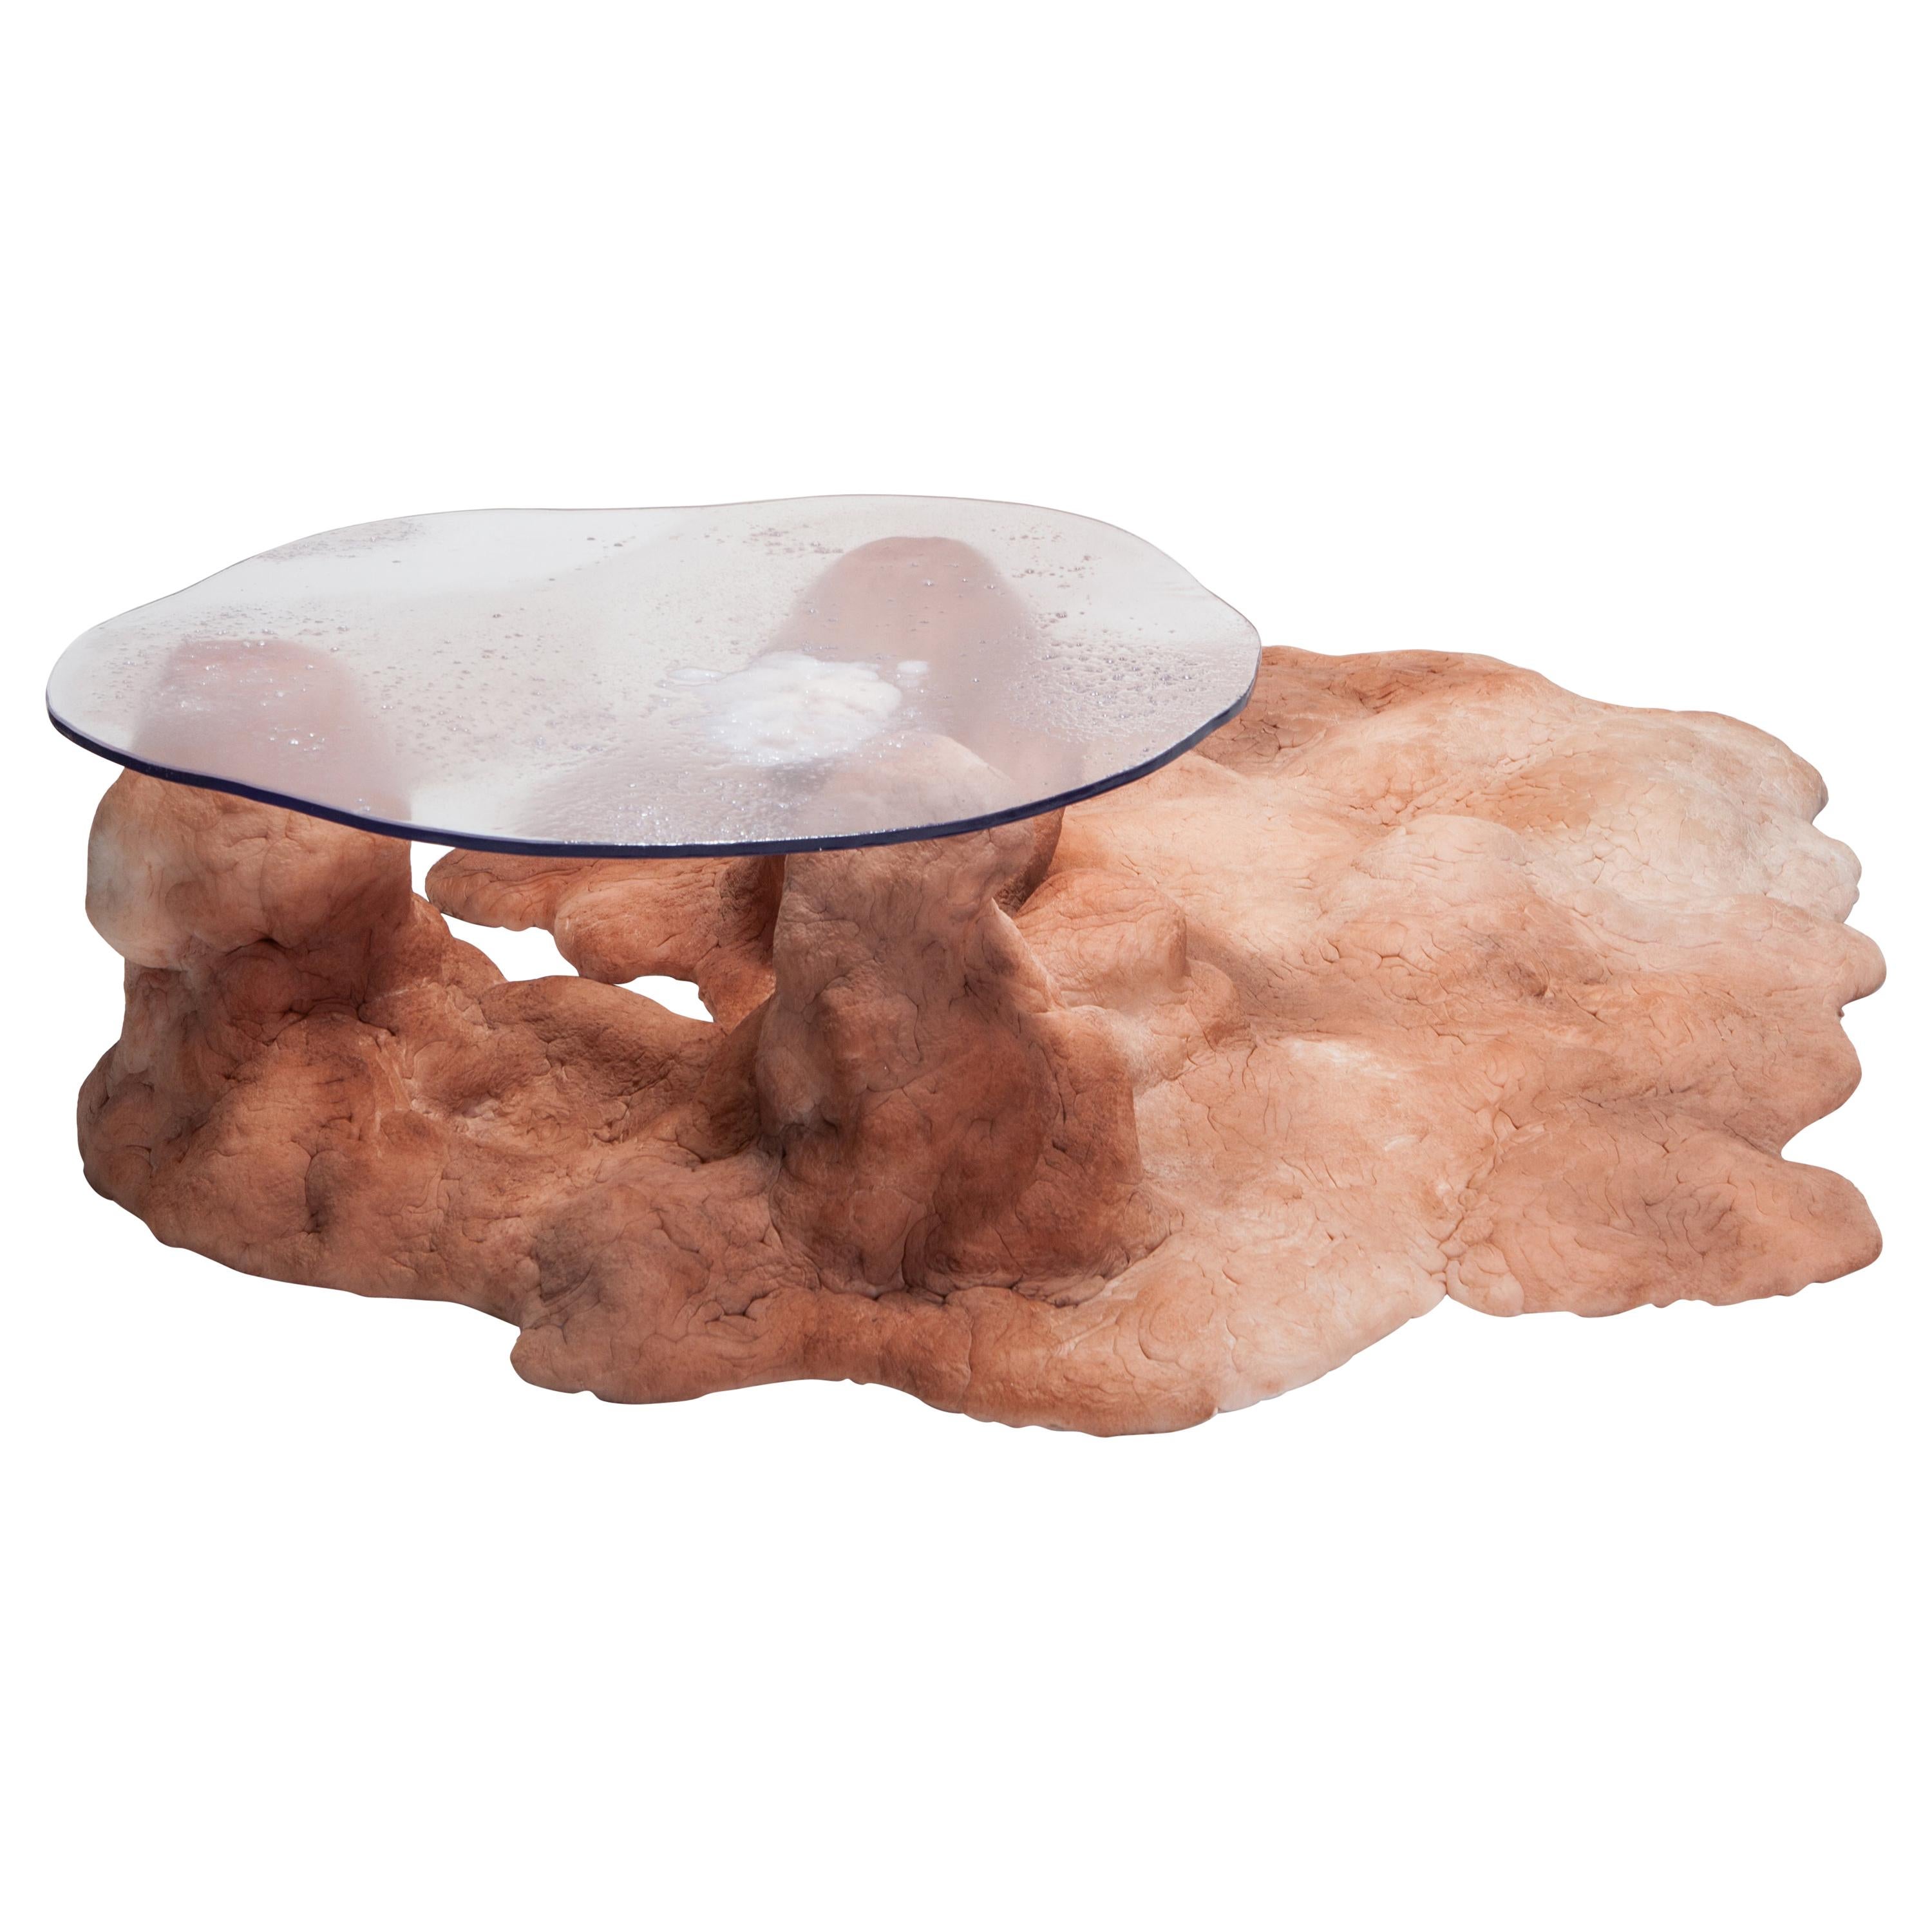 Gully Coffee Table by Elissa Lacoste for Everyday Gallery, 2019